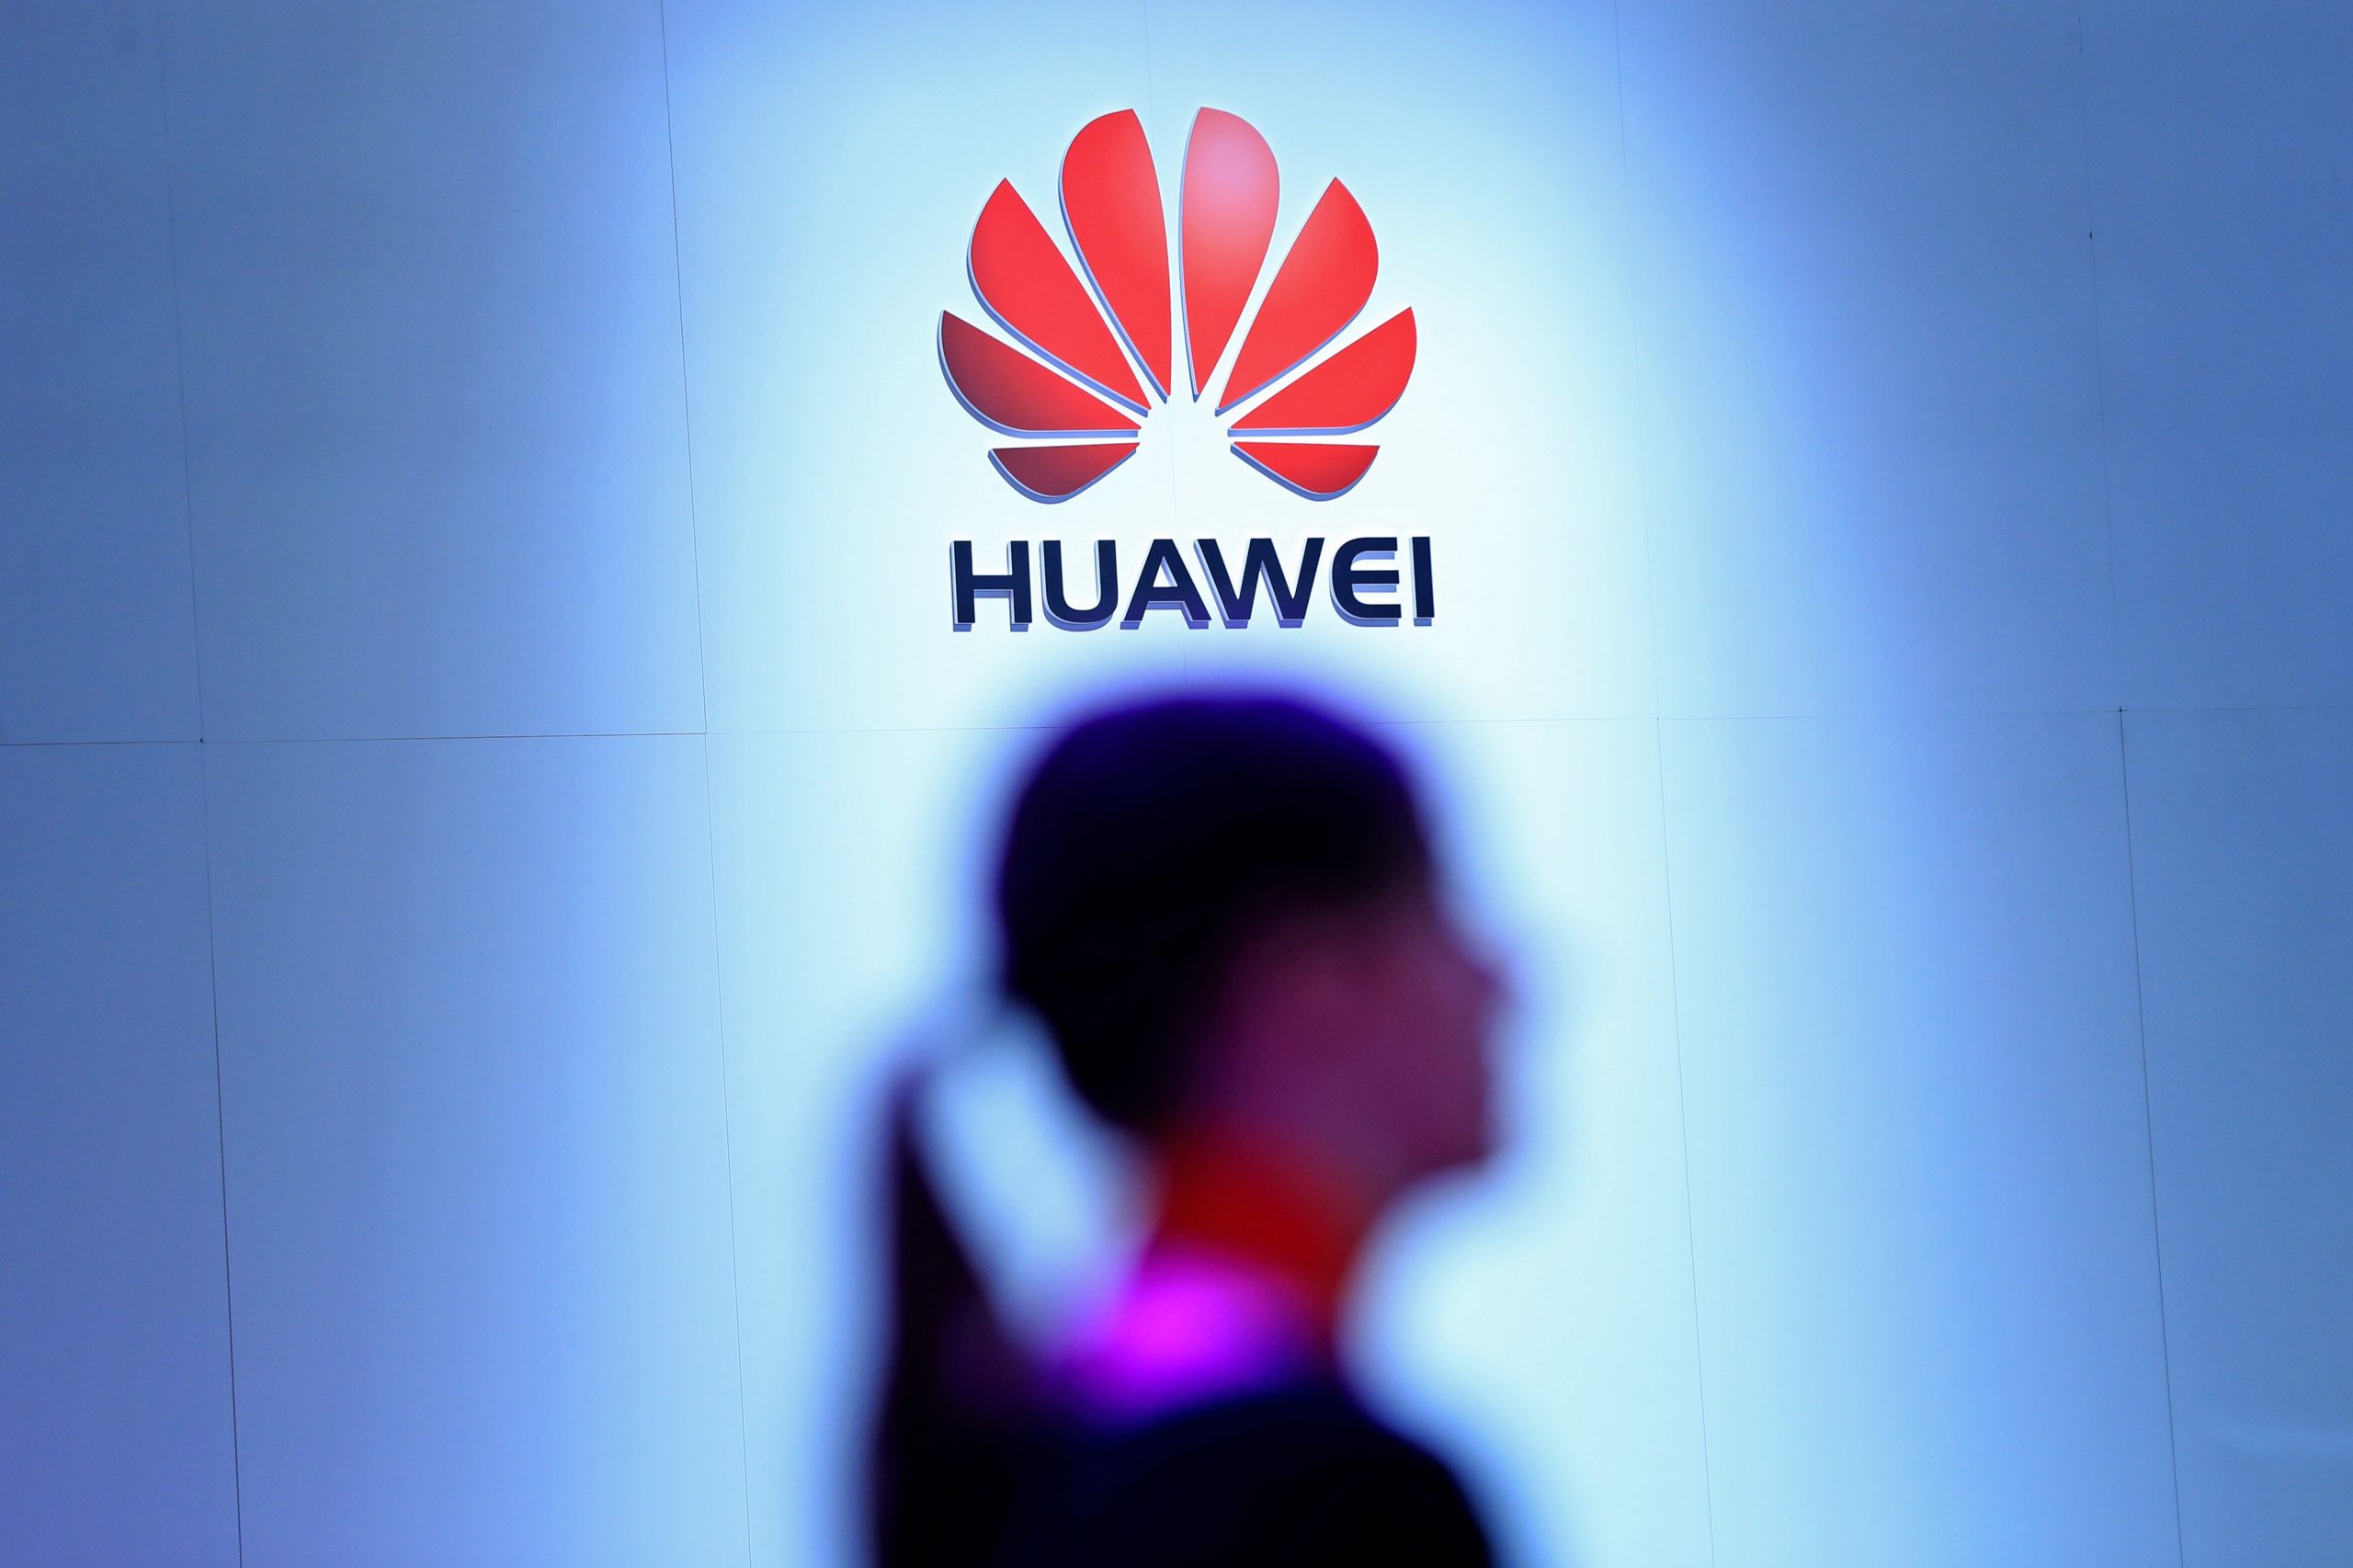 Huawei sees sharp decline in growth due to US Sanctions